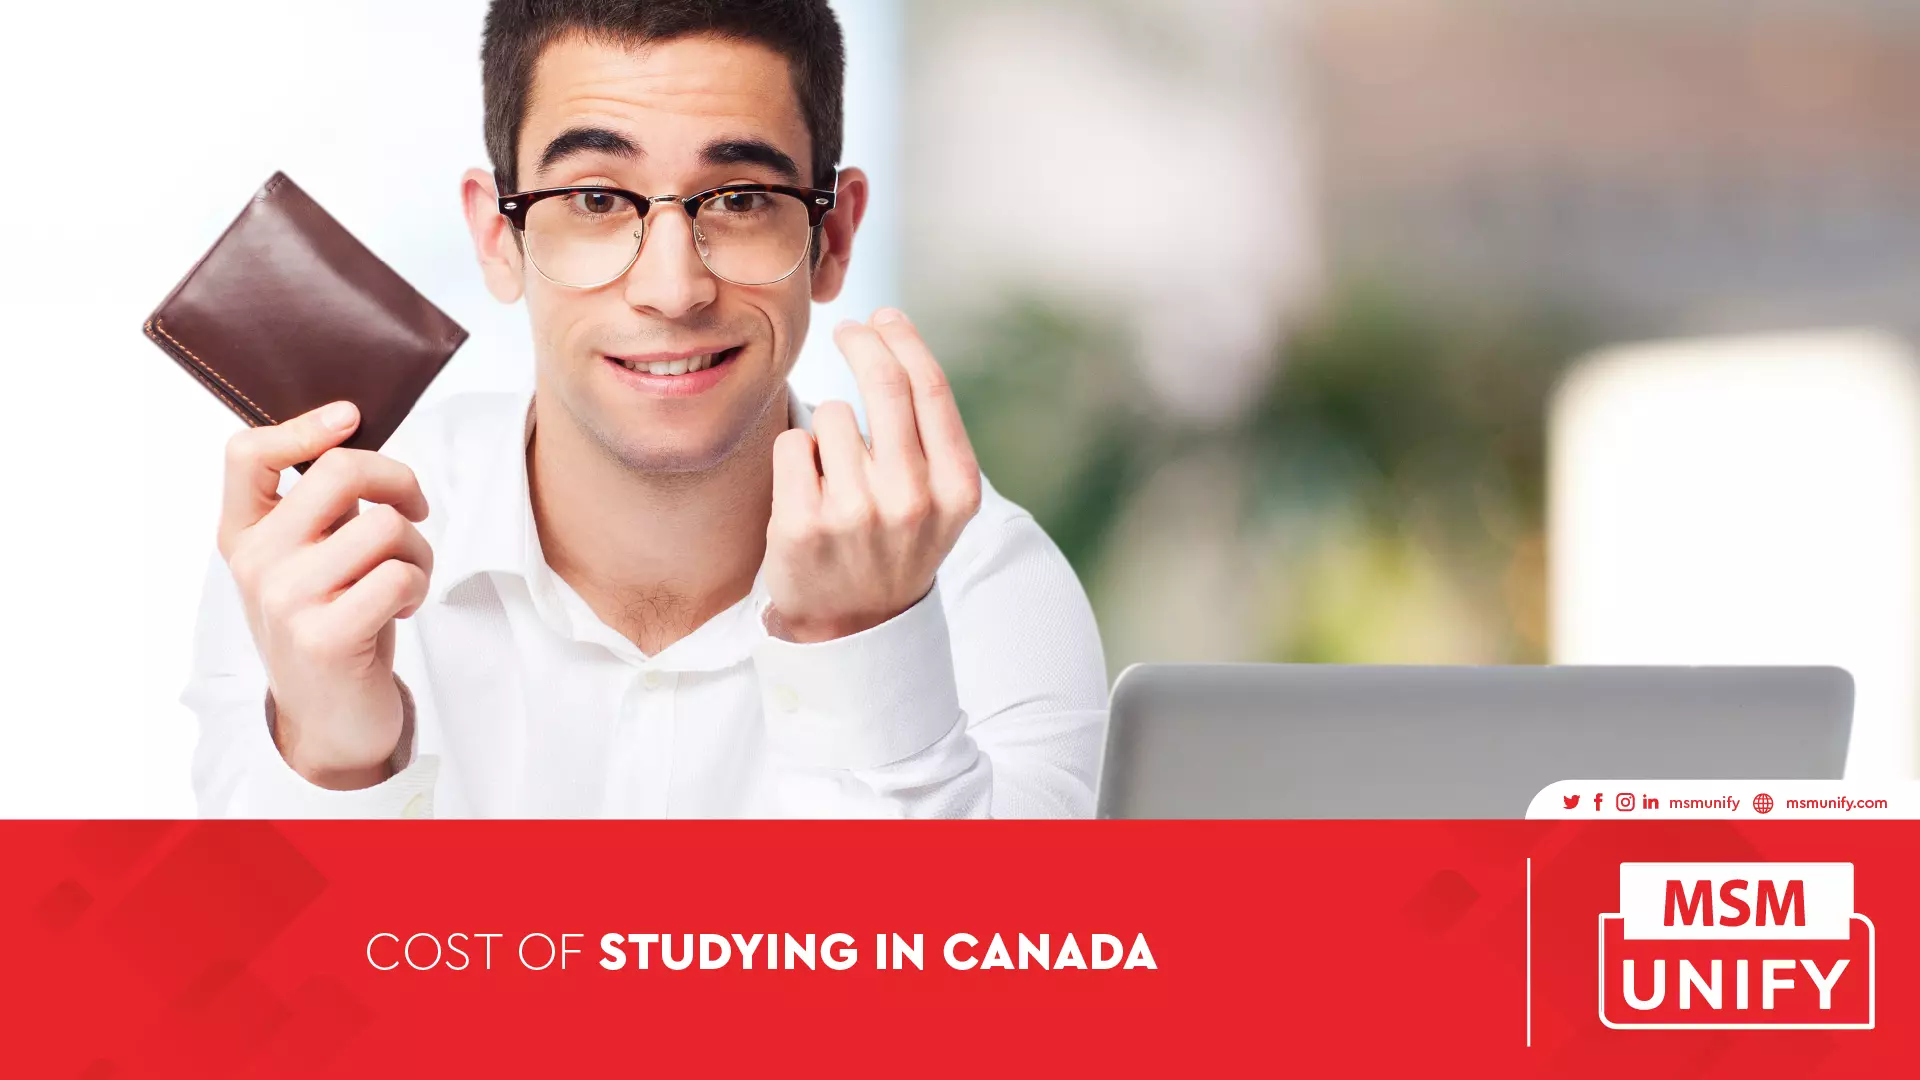 063022 MSM Unify  Cost of Studying in Canada 01